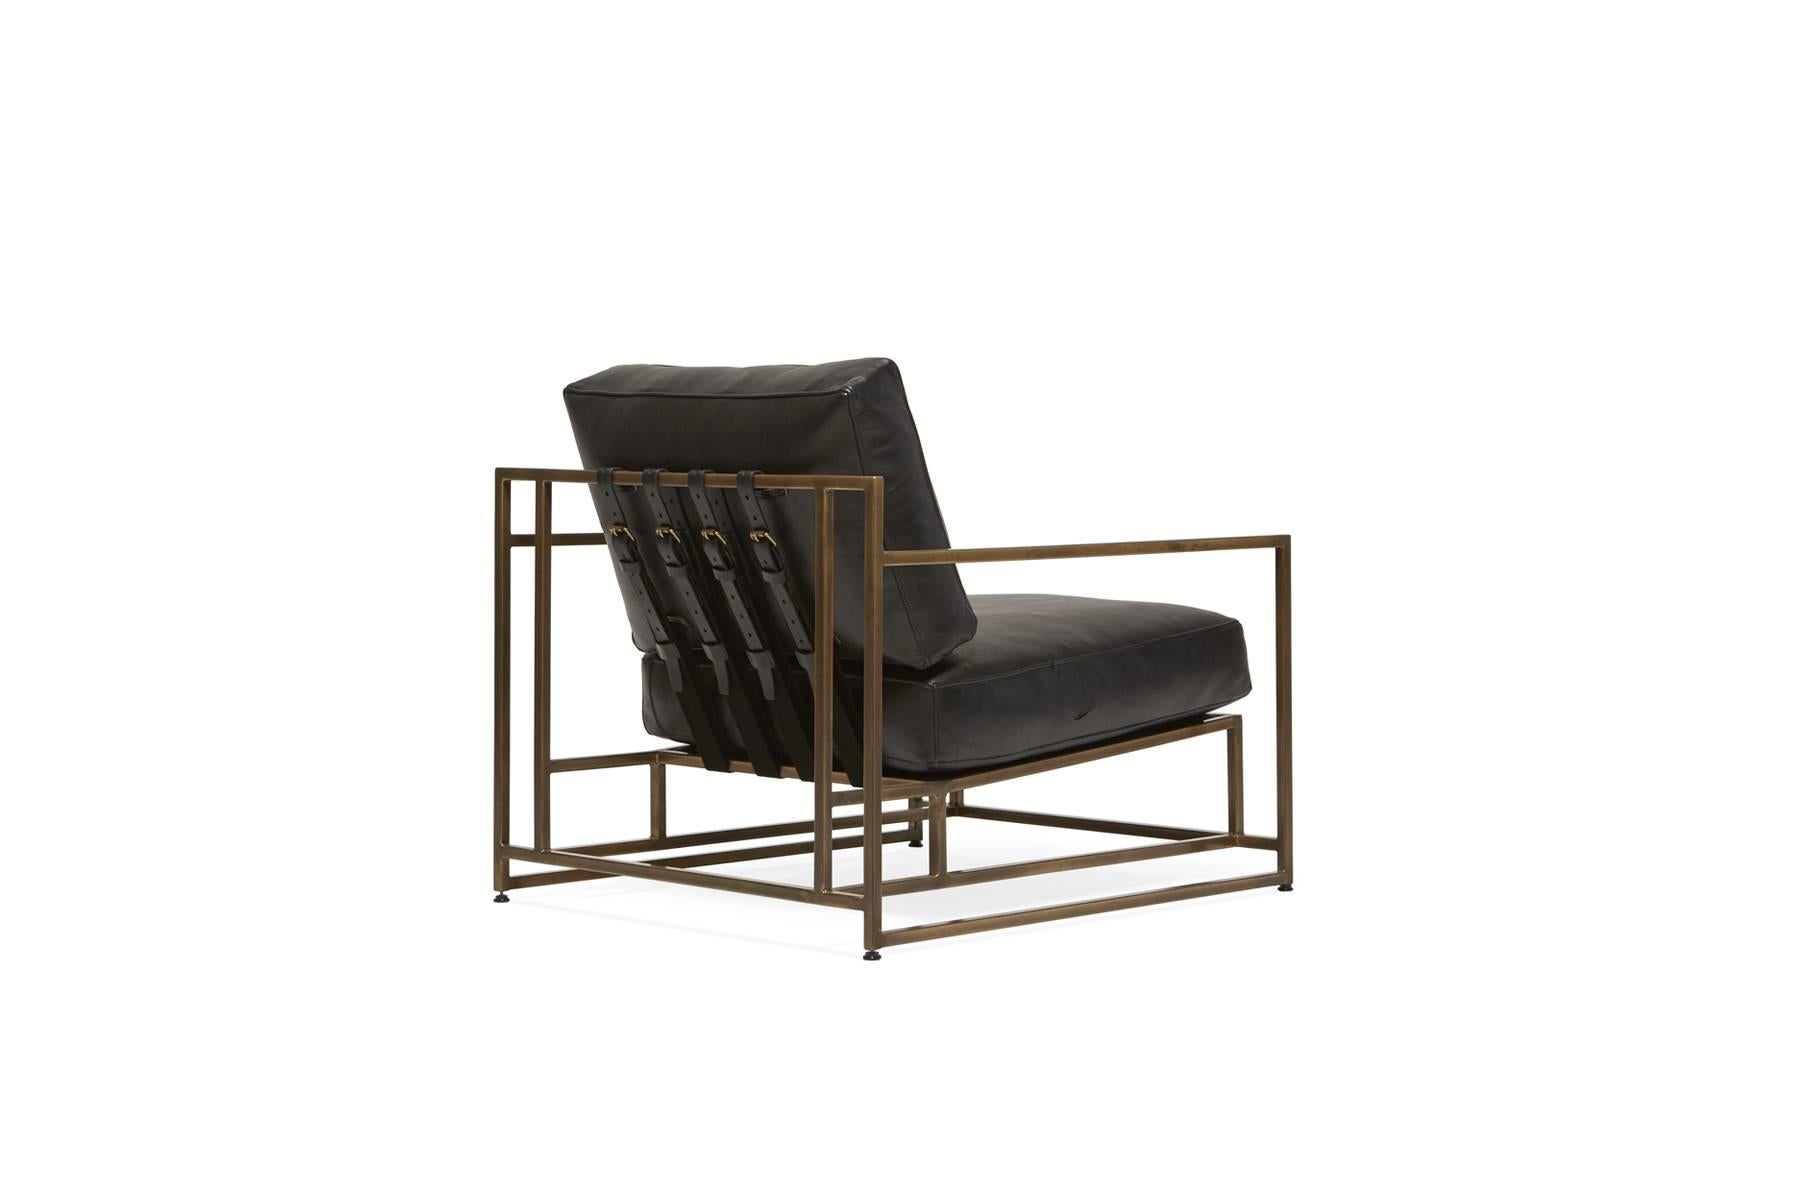 Metalwork Obsidian Black Leather and Antique Brass Armchair For Sale